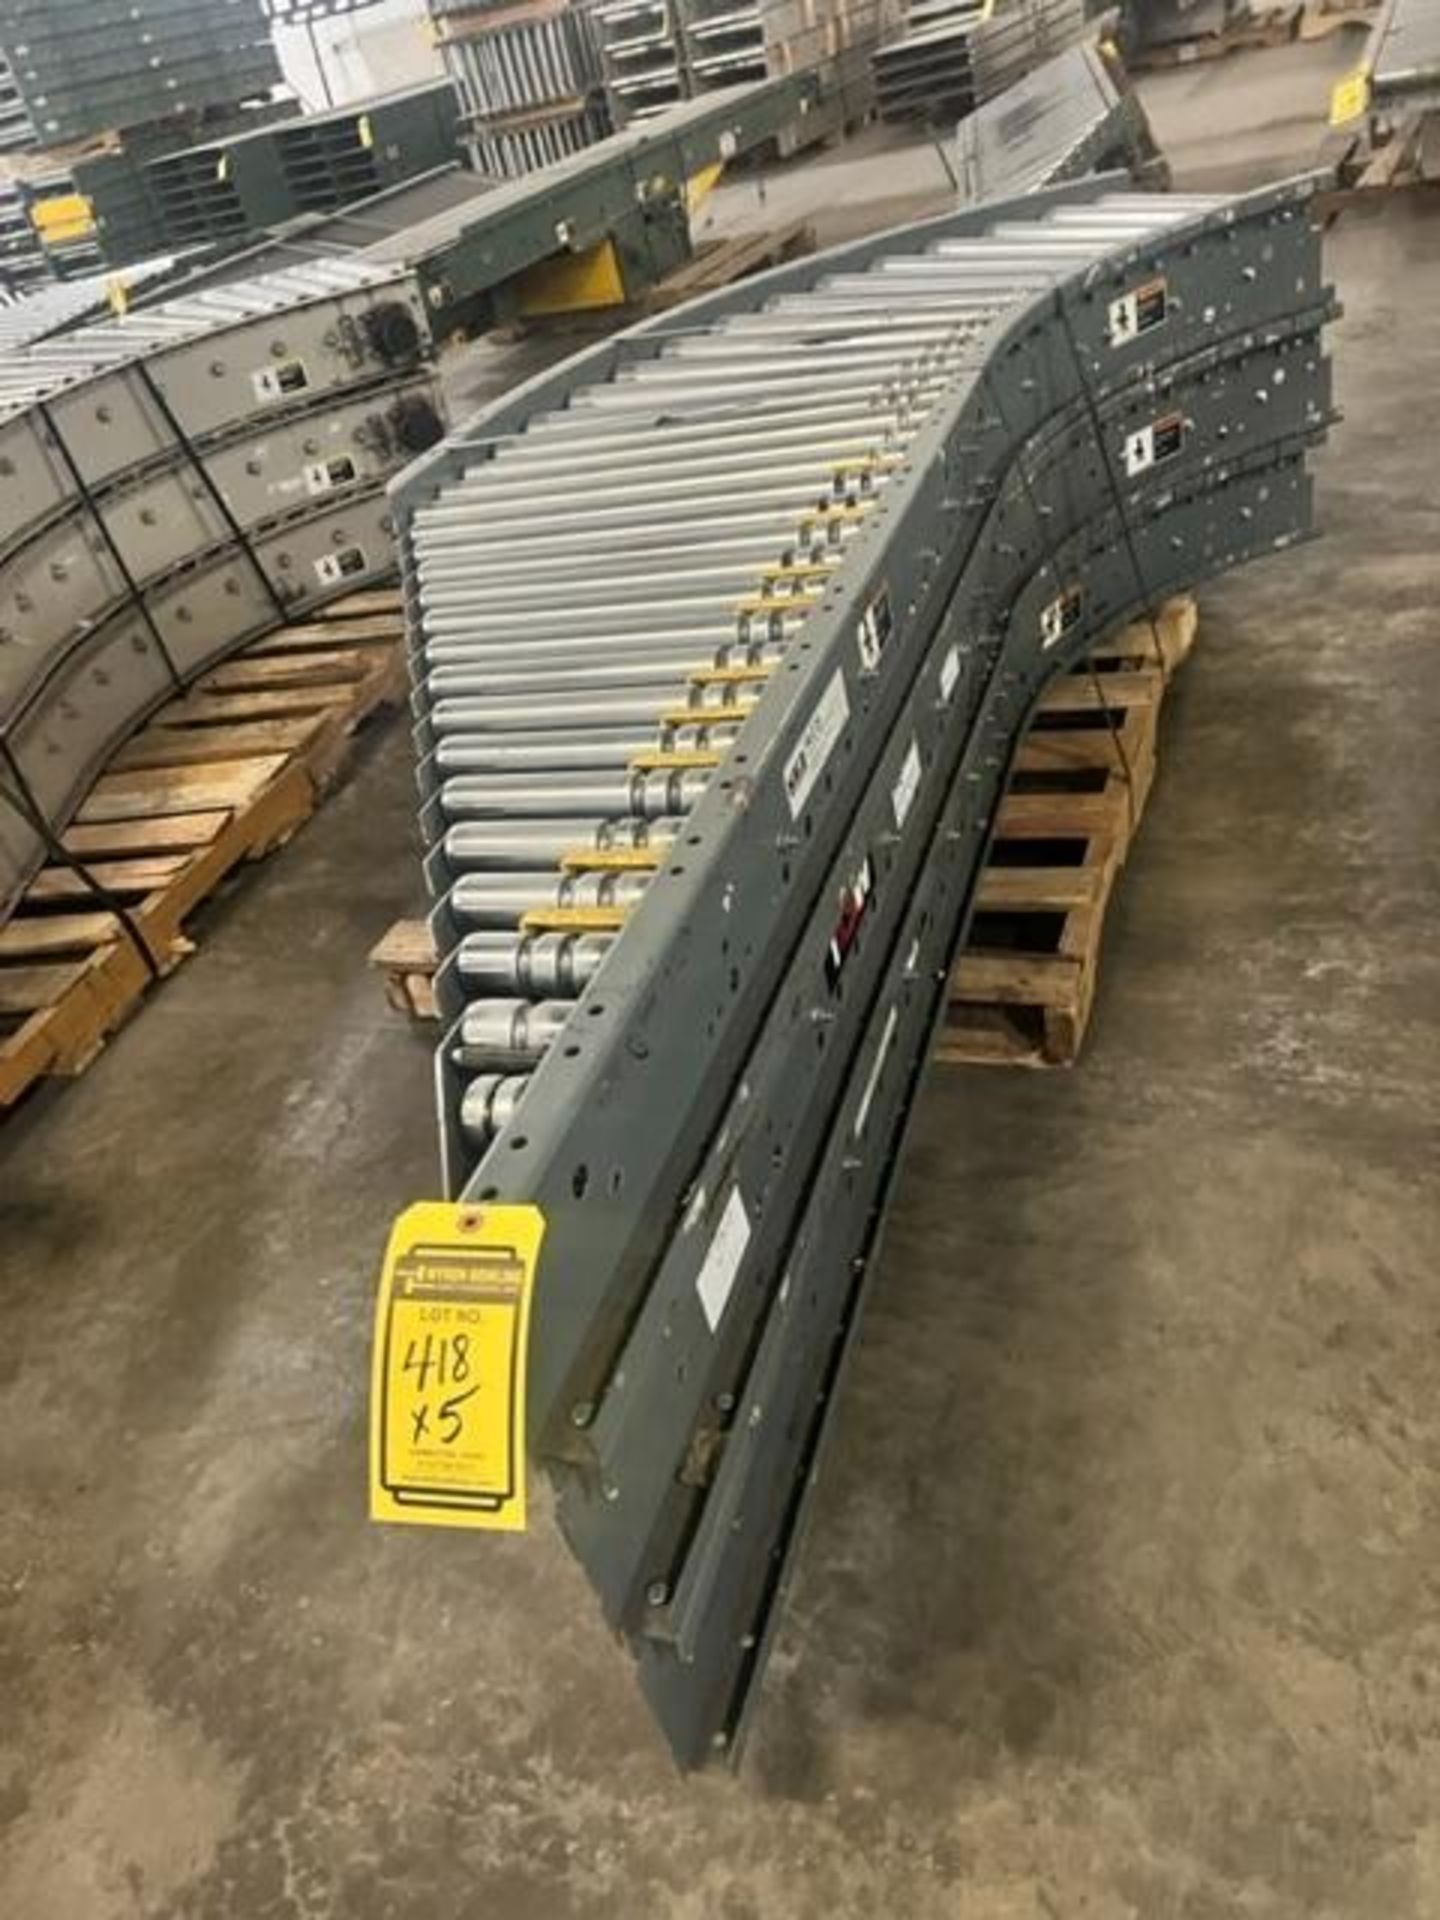 (5x) Xenorol Roller Conveyor, 21-1/2" Rollers ($25 Loading fee will be added to buyers invoice)